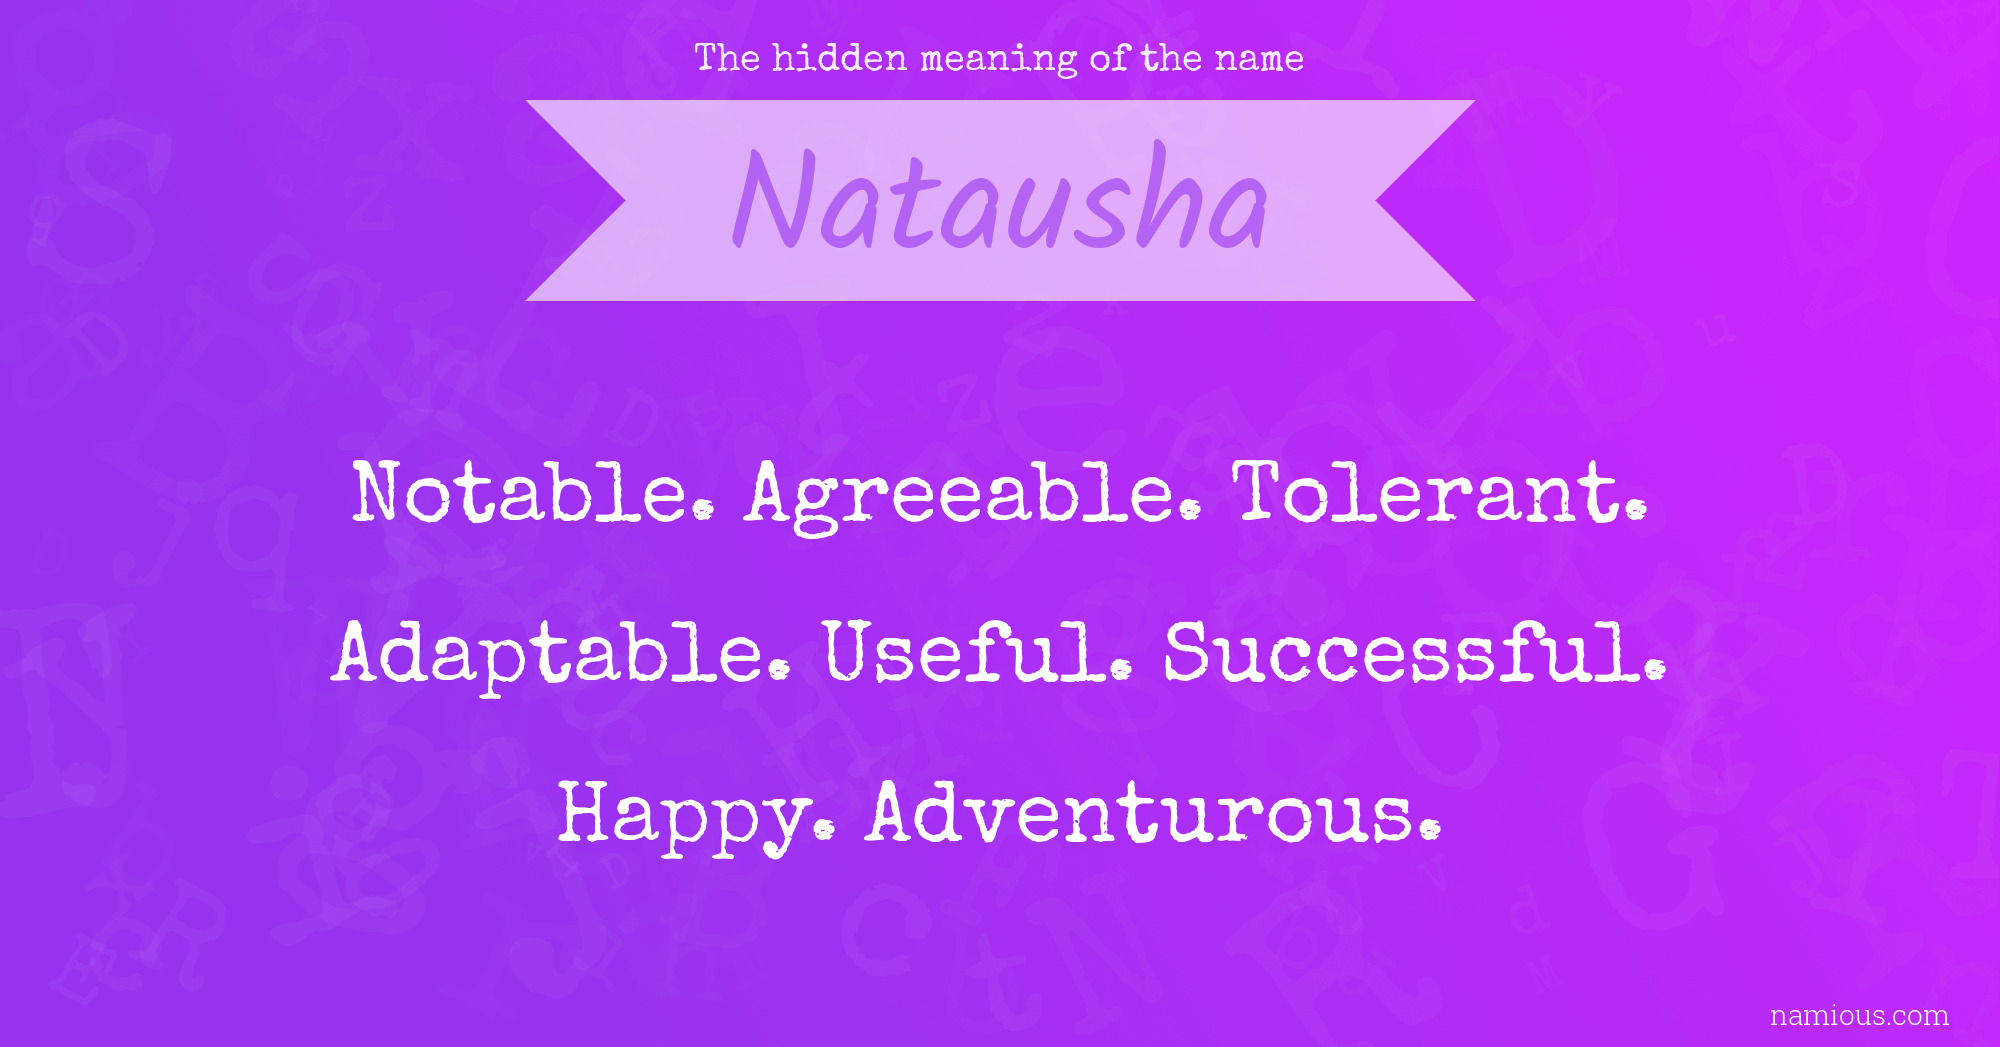 The hidden meaning of the name Natausha